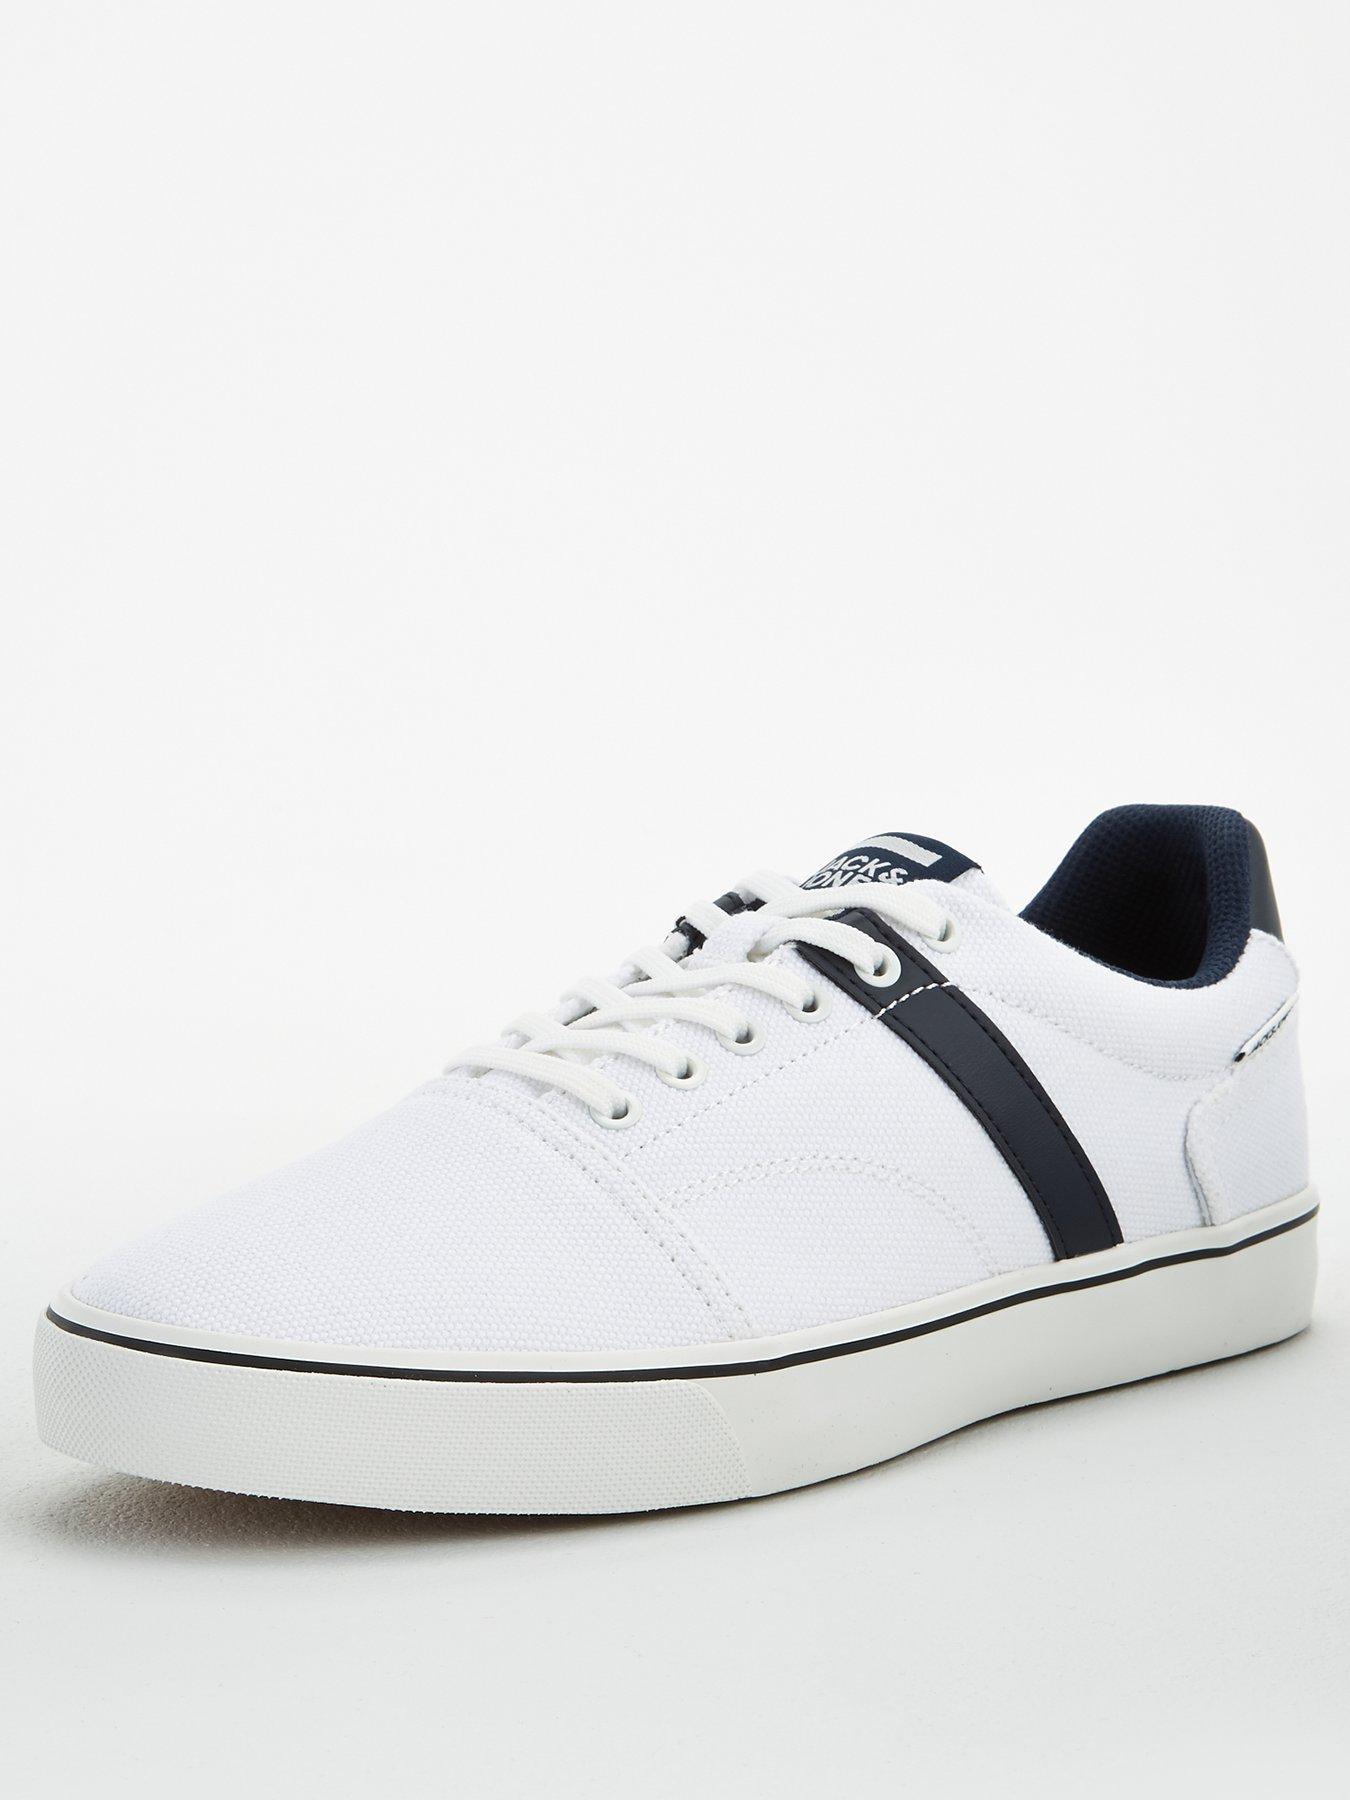 littlewoods mens trainers sale